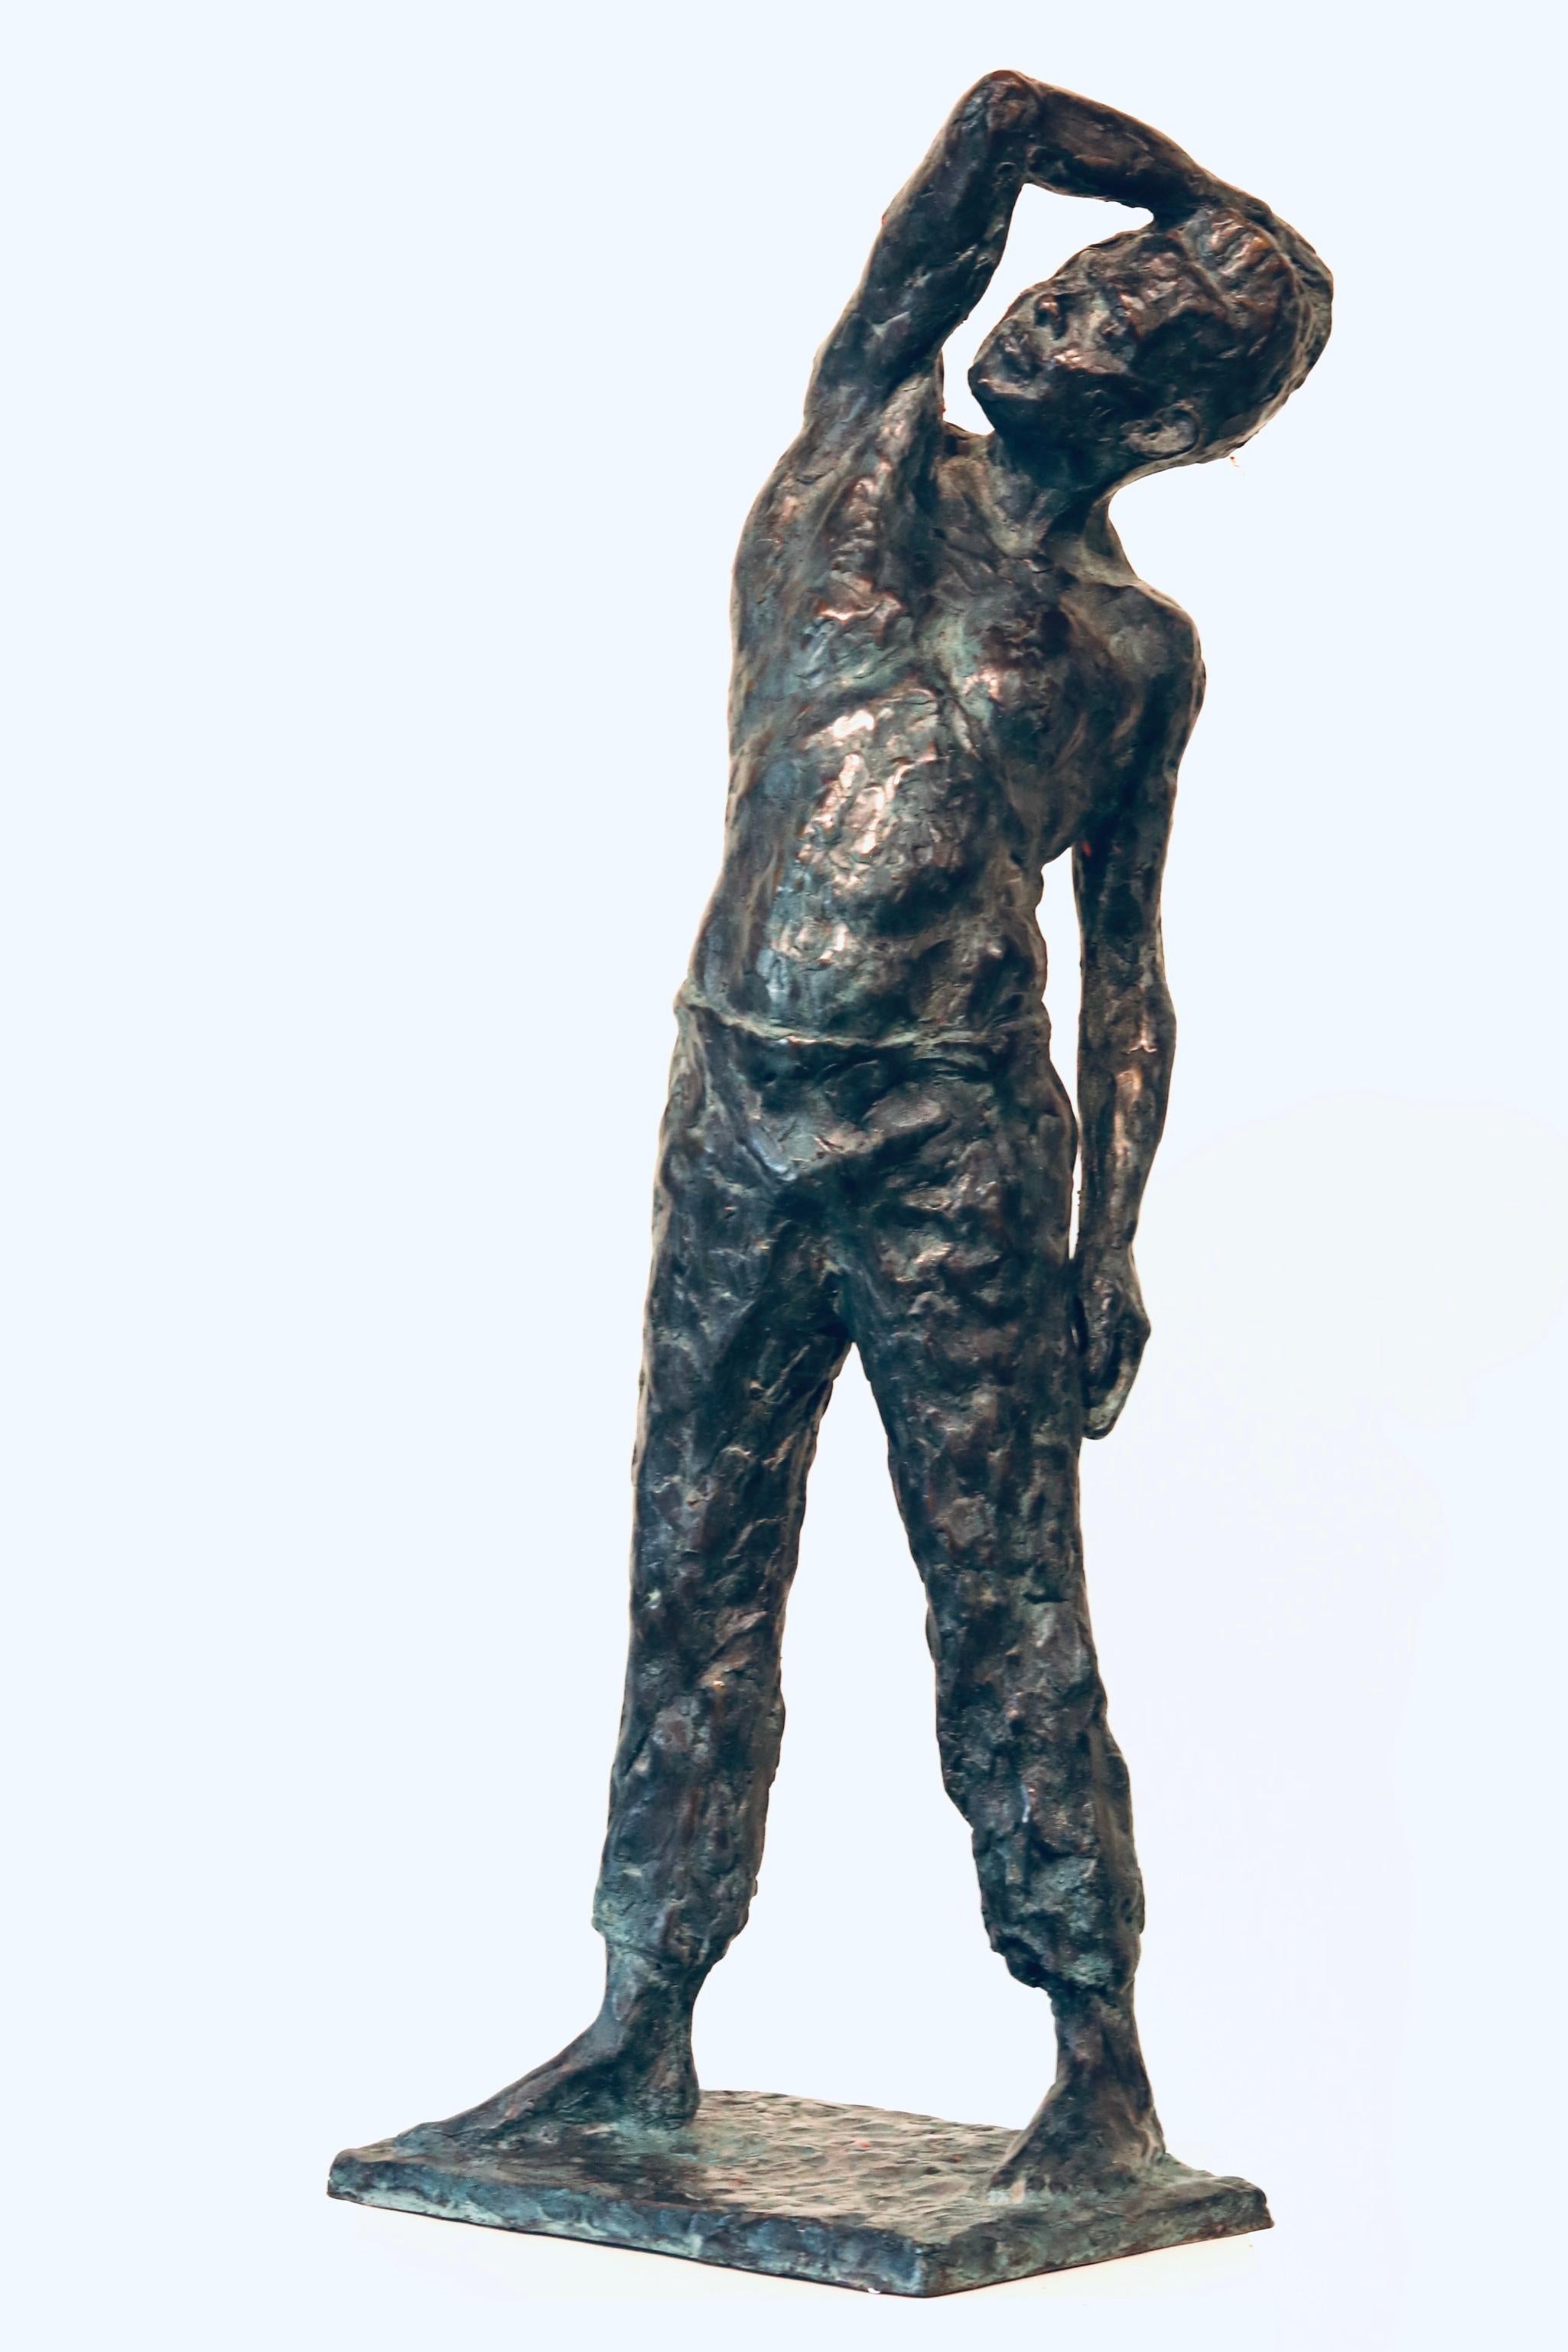 Roy- 21st Century Sculpture of a bare chested male figure standing